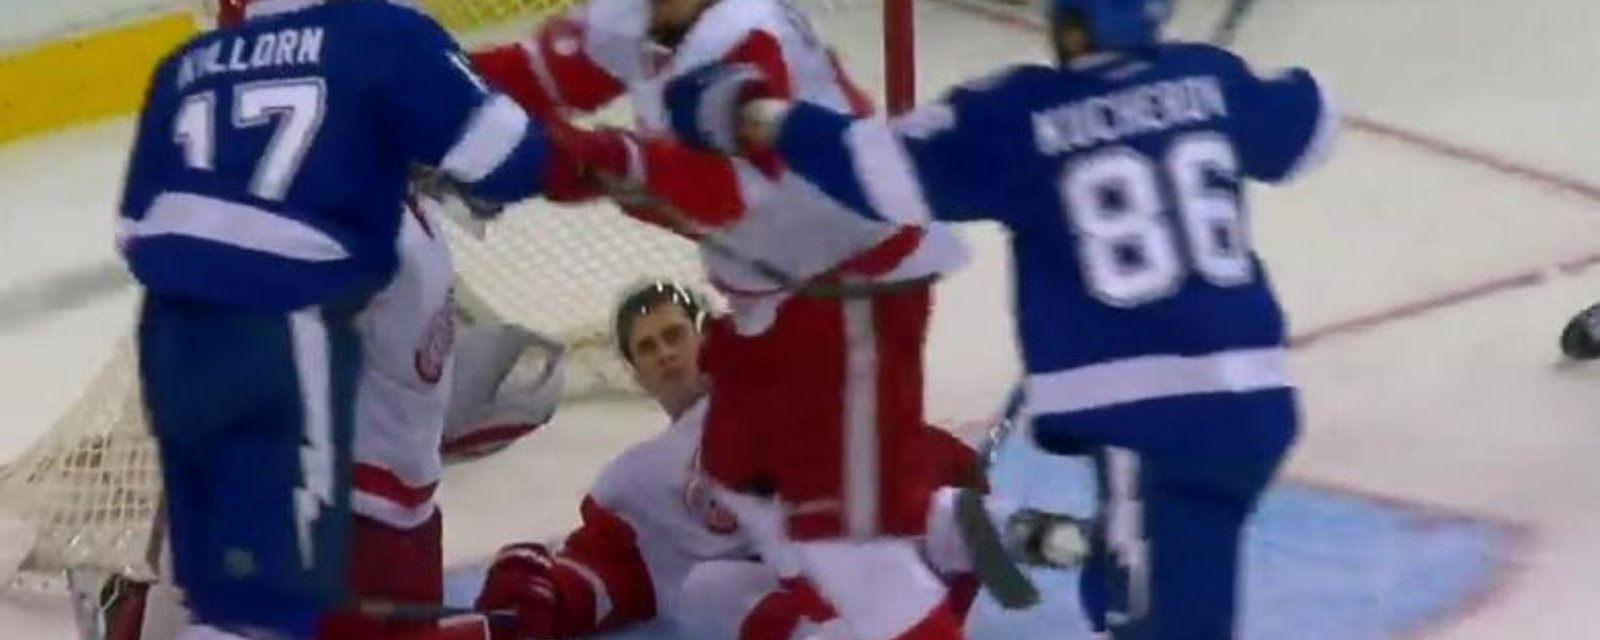 Killorn levels Wings rookie Dylan Larkin and a melee ensues.